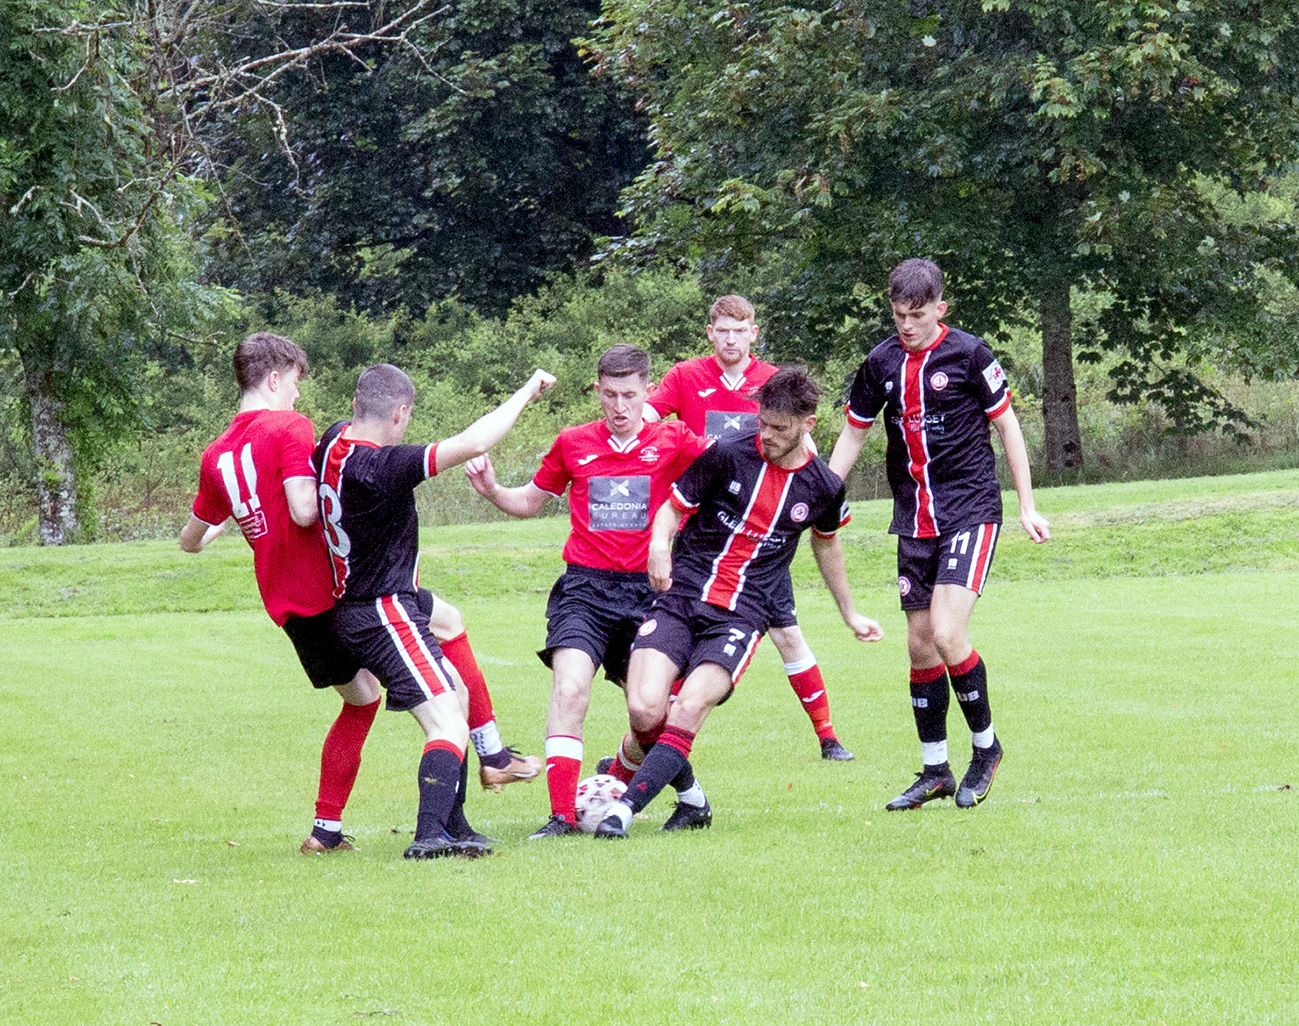 Rhu Colts secured their first points of the Glasgow Colleges FA campaign with a fine 4-1 home win over Clydebank Red Star on Saturday, August 12 (Photo: Tom Watt)